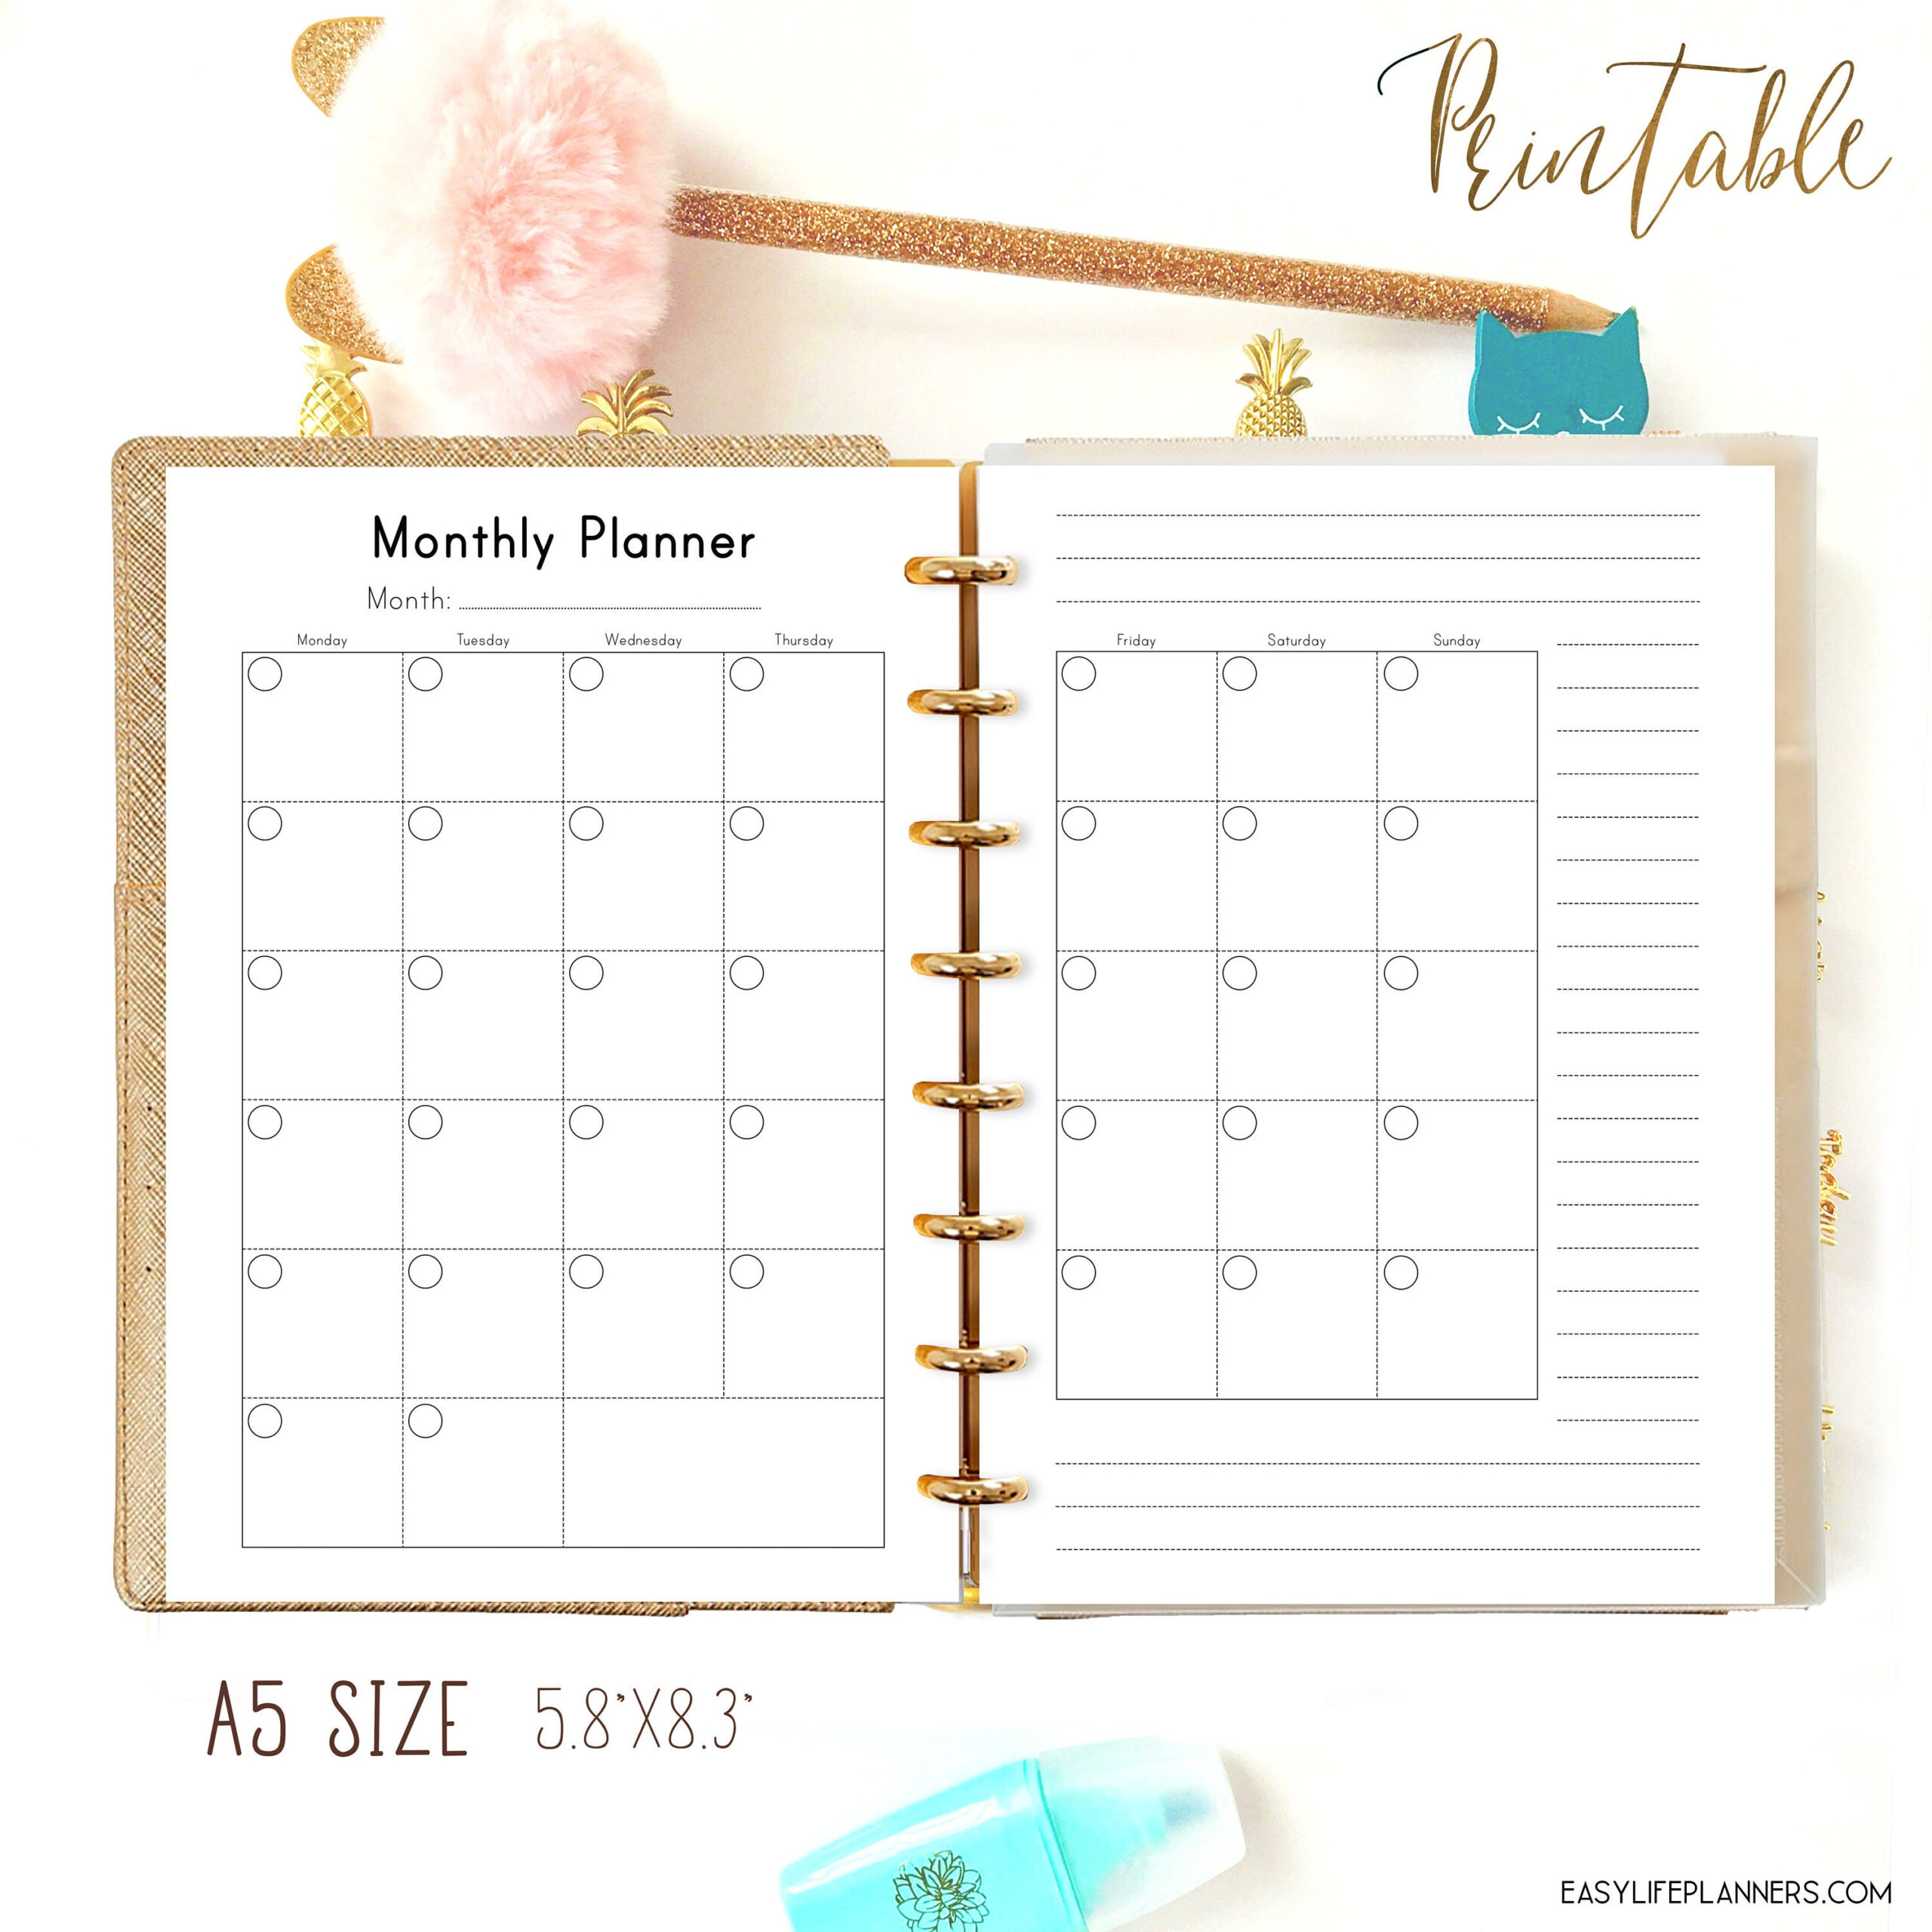 A5 Monthly Planner A5 Planner Inserts Filofax A5 Inserts 5.83 X 8.27 within Two Page Printable Monthly Calendar Pdf Free 8.5X11